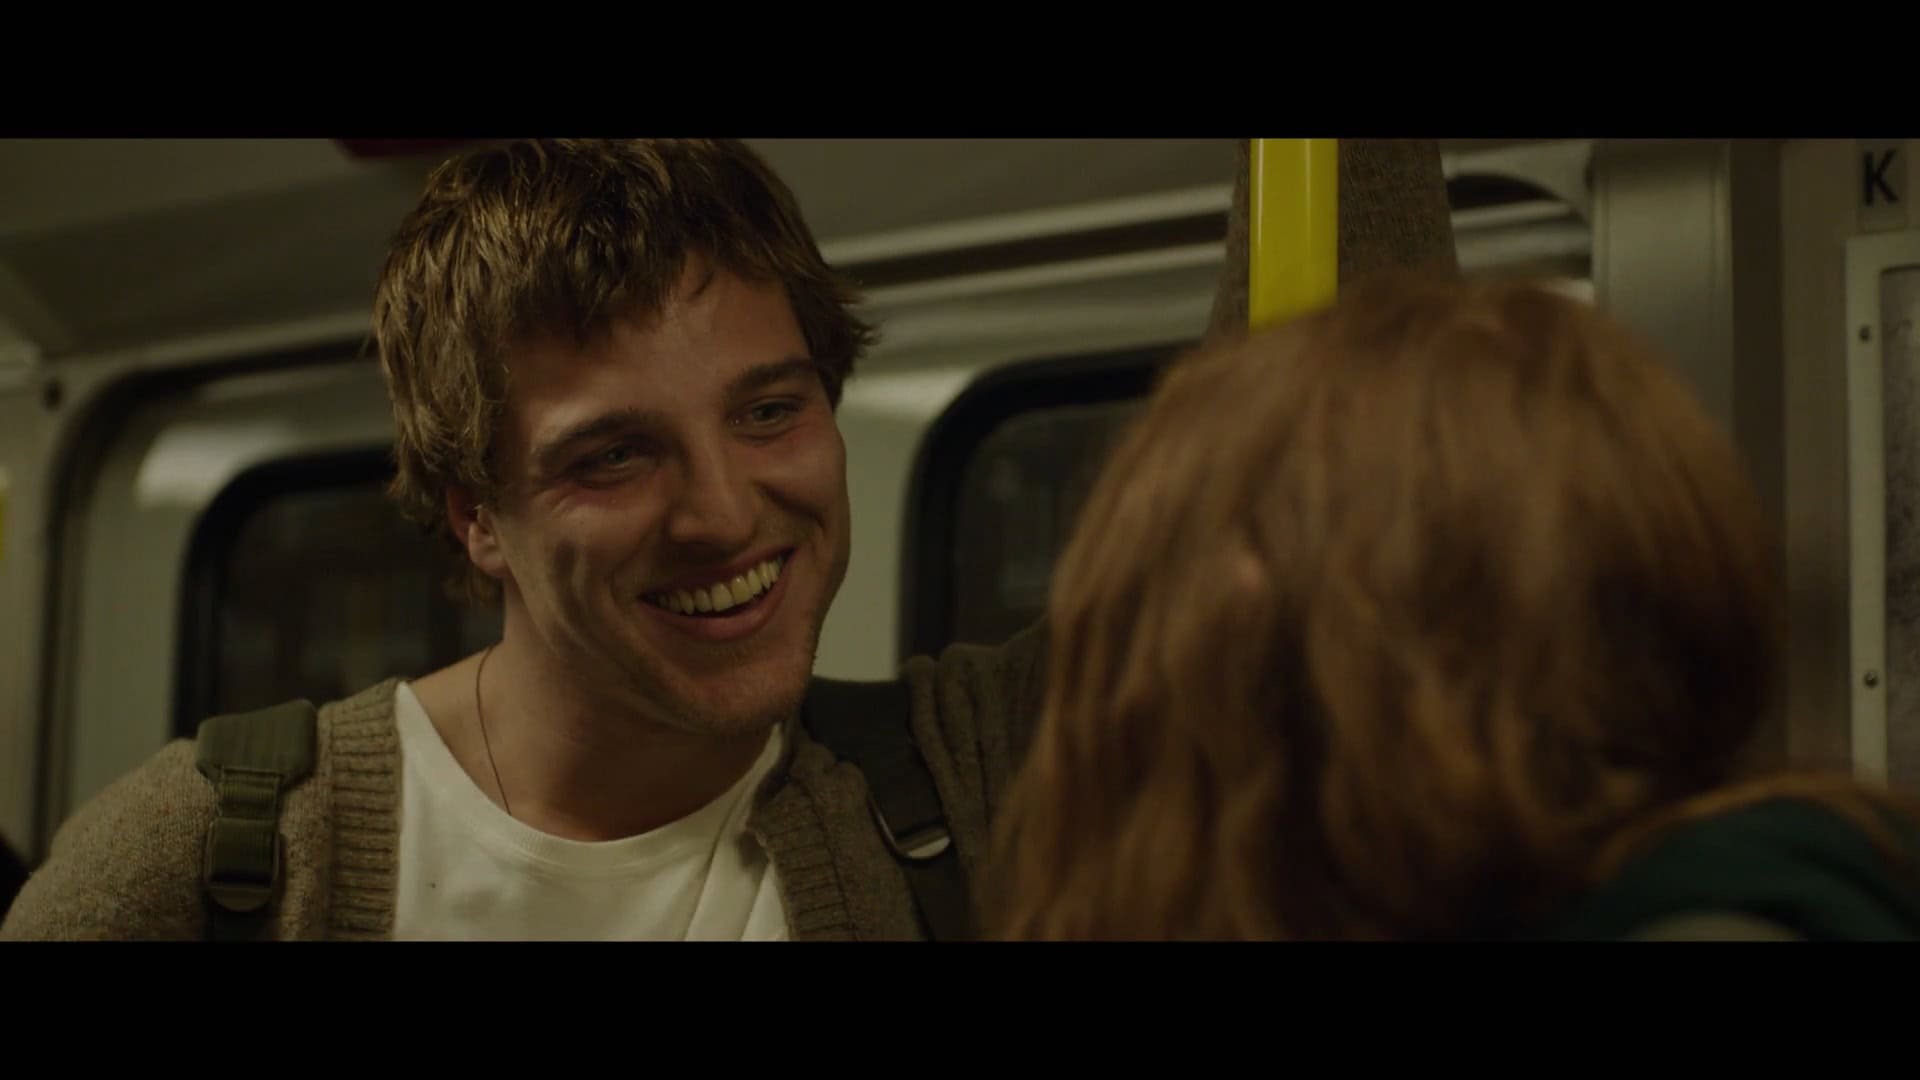 Martin as Jonas Dassler smiling at Mazzy on the train